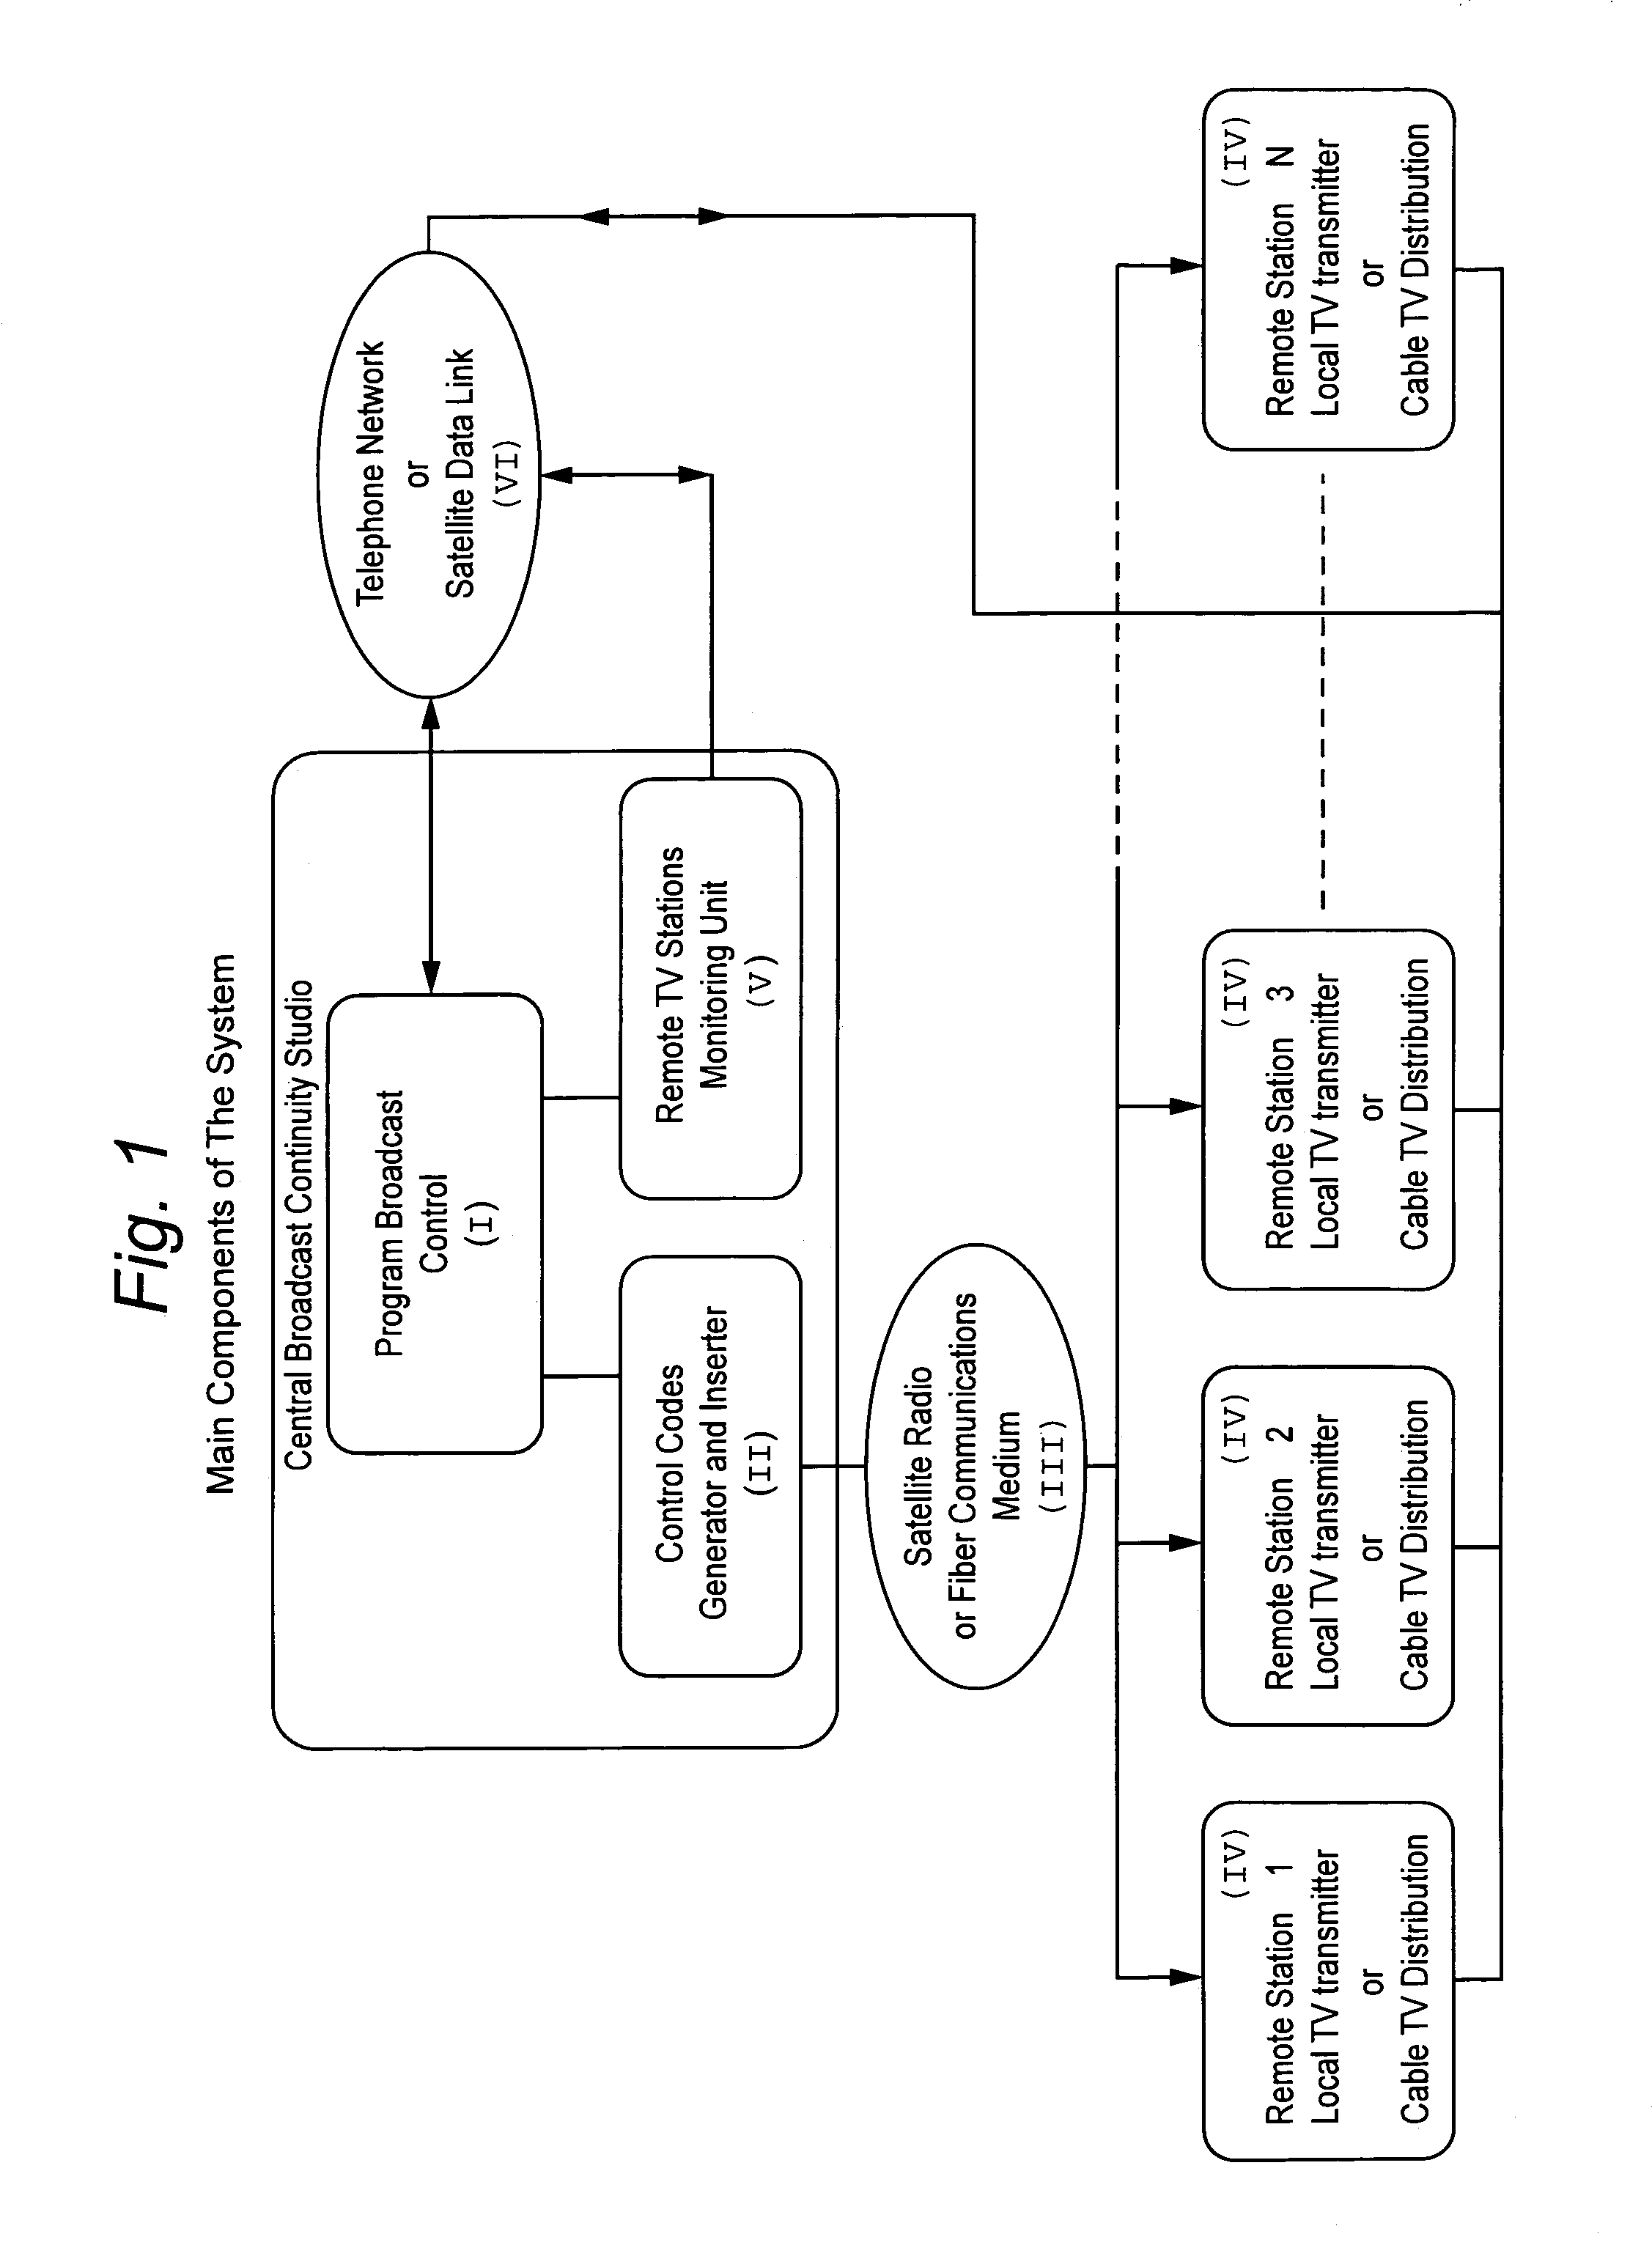 Method and apparatus for remote control of a distributed television broadcasting system